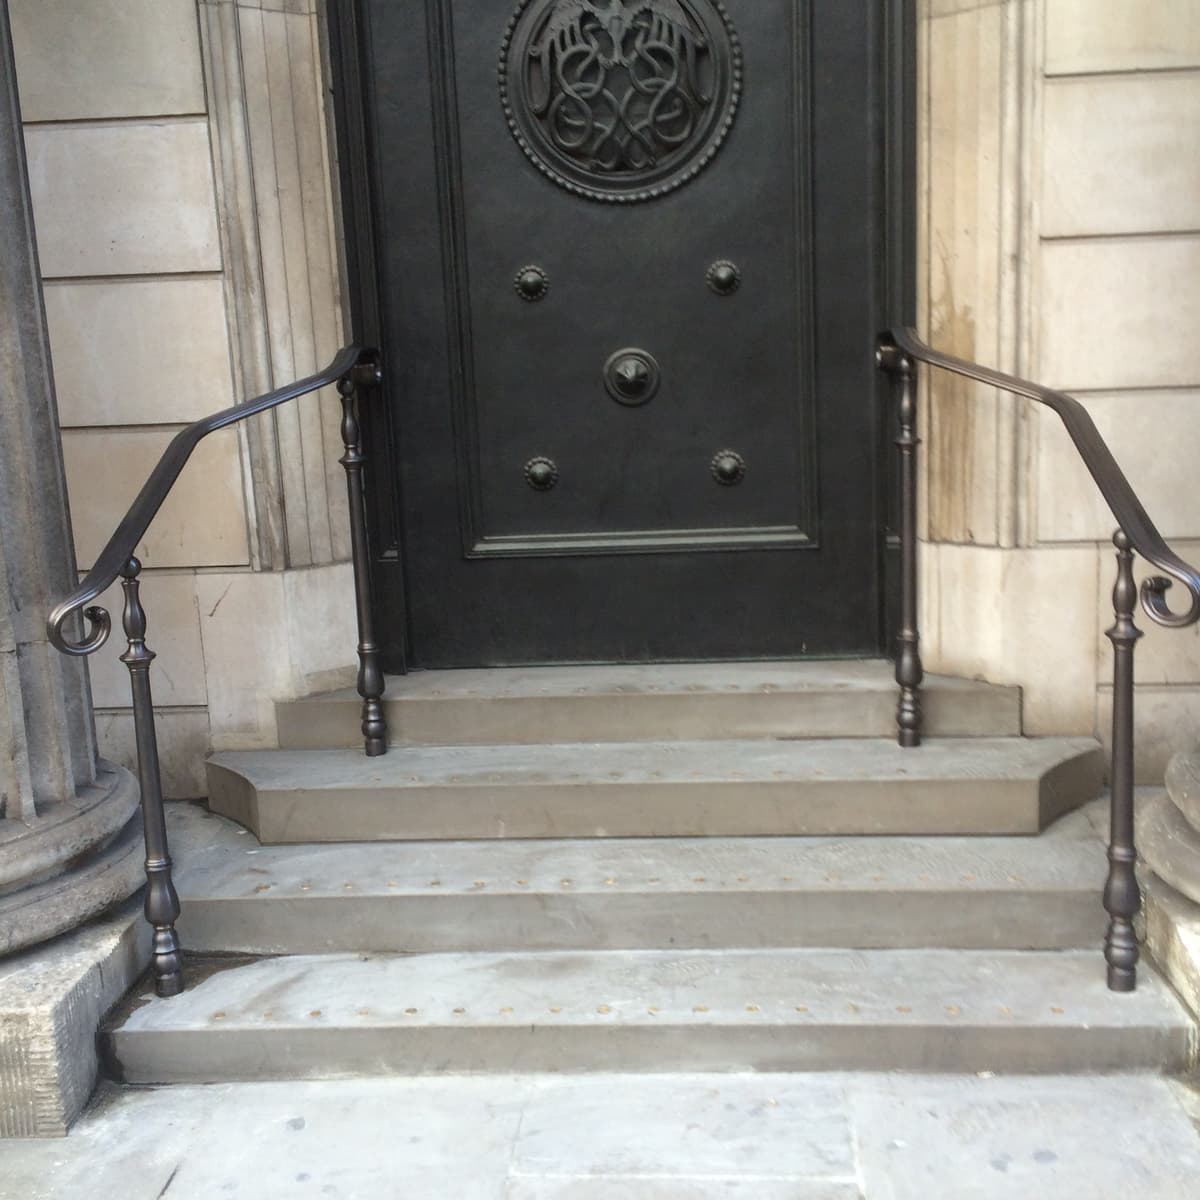 Bank of England before a sesame wheelchair lift installed